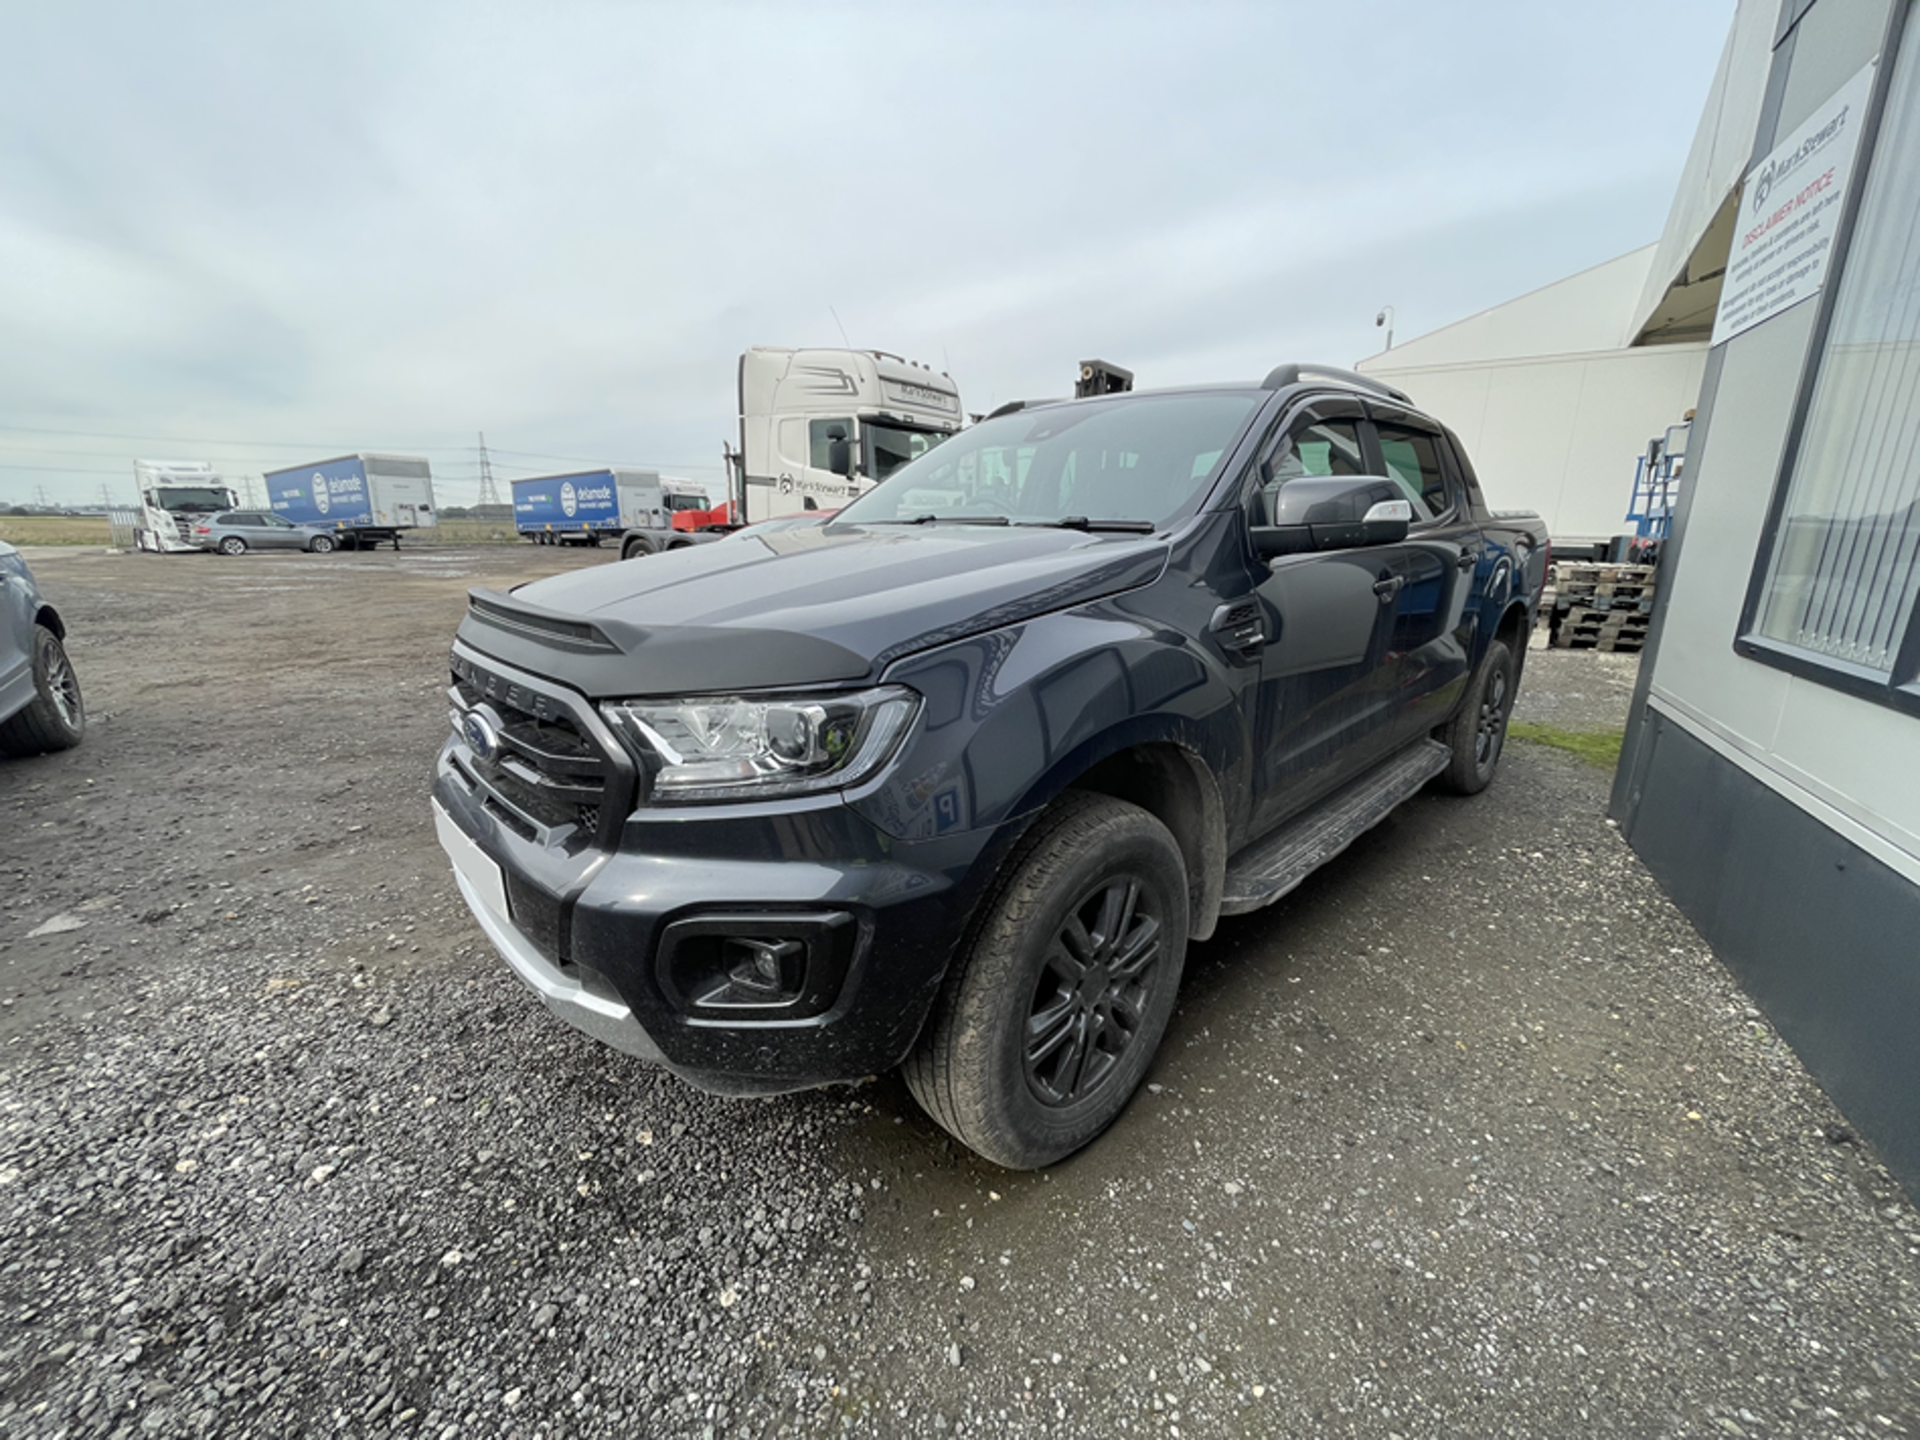 FORD Wildtrak Ranger 2.0 EcoBlue 213 Auto Double Cab Pick Up, Registration No. FH22 KVD, First - Image 2 of 4